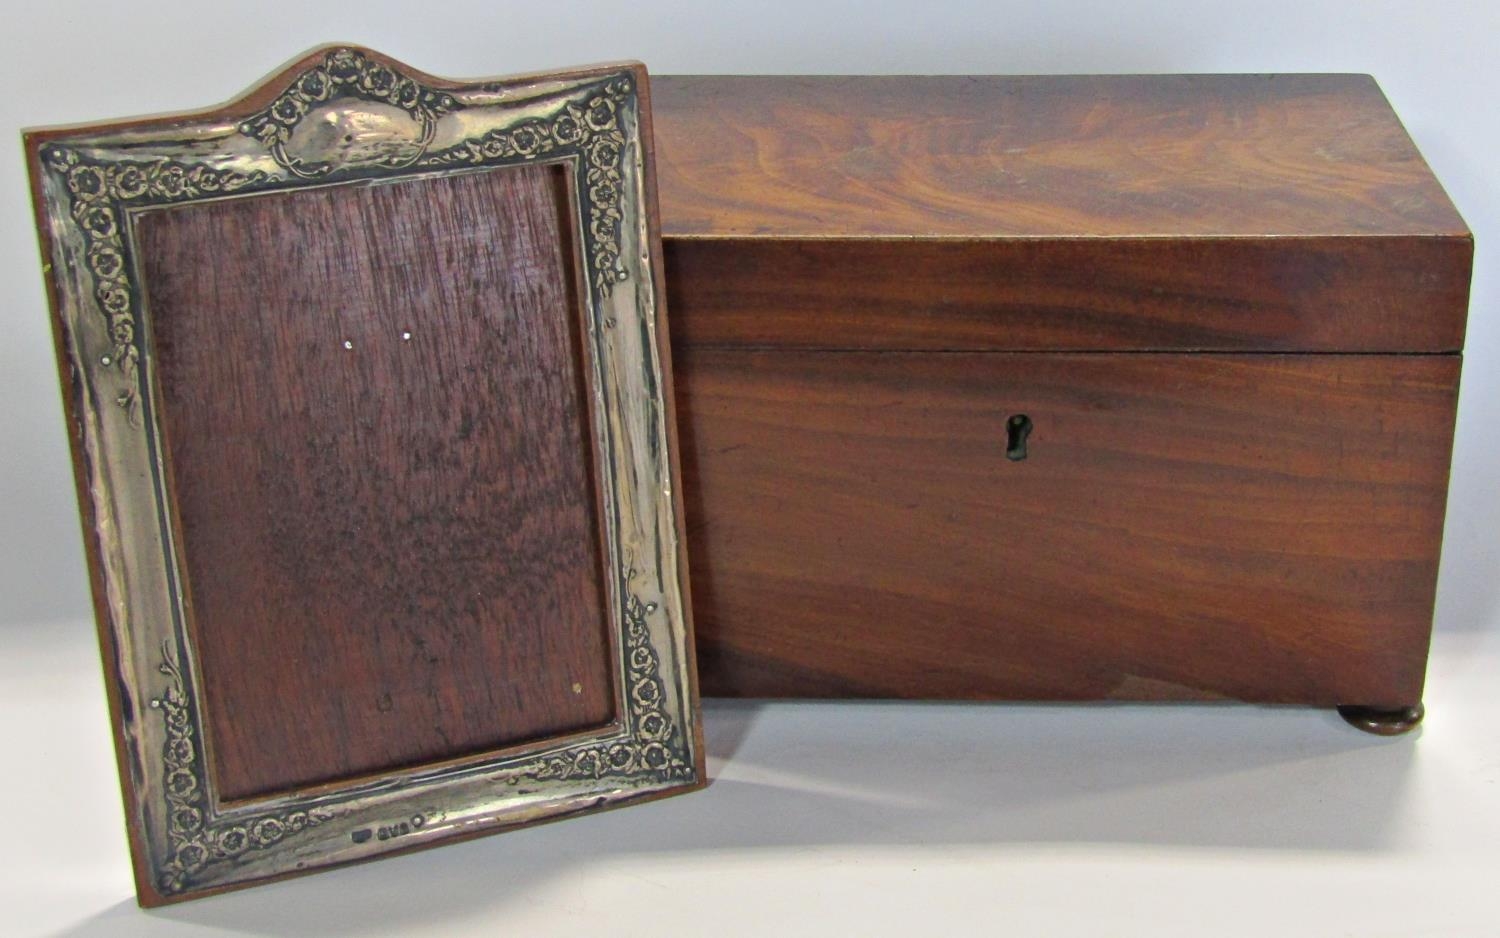 19th century mahogany tea caddy (af)and a silver mounted wooden photo frame.